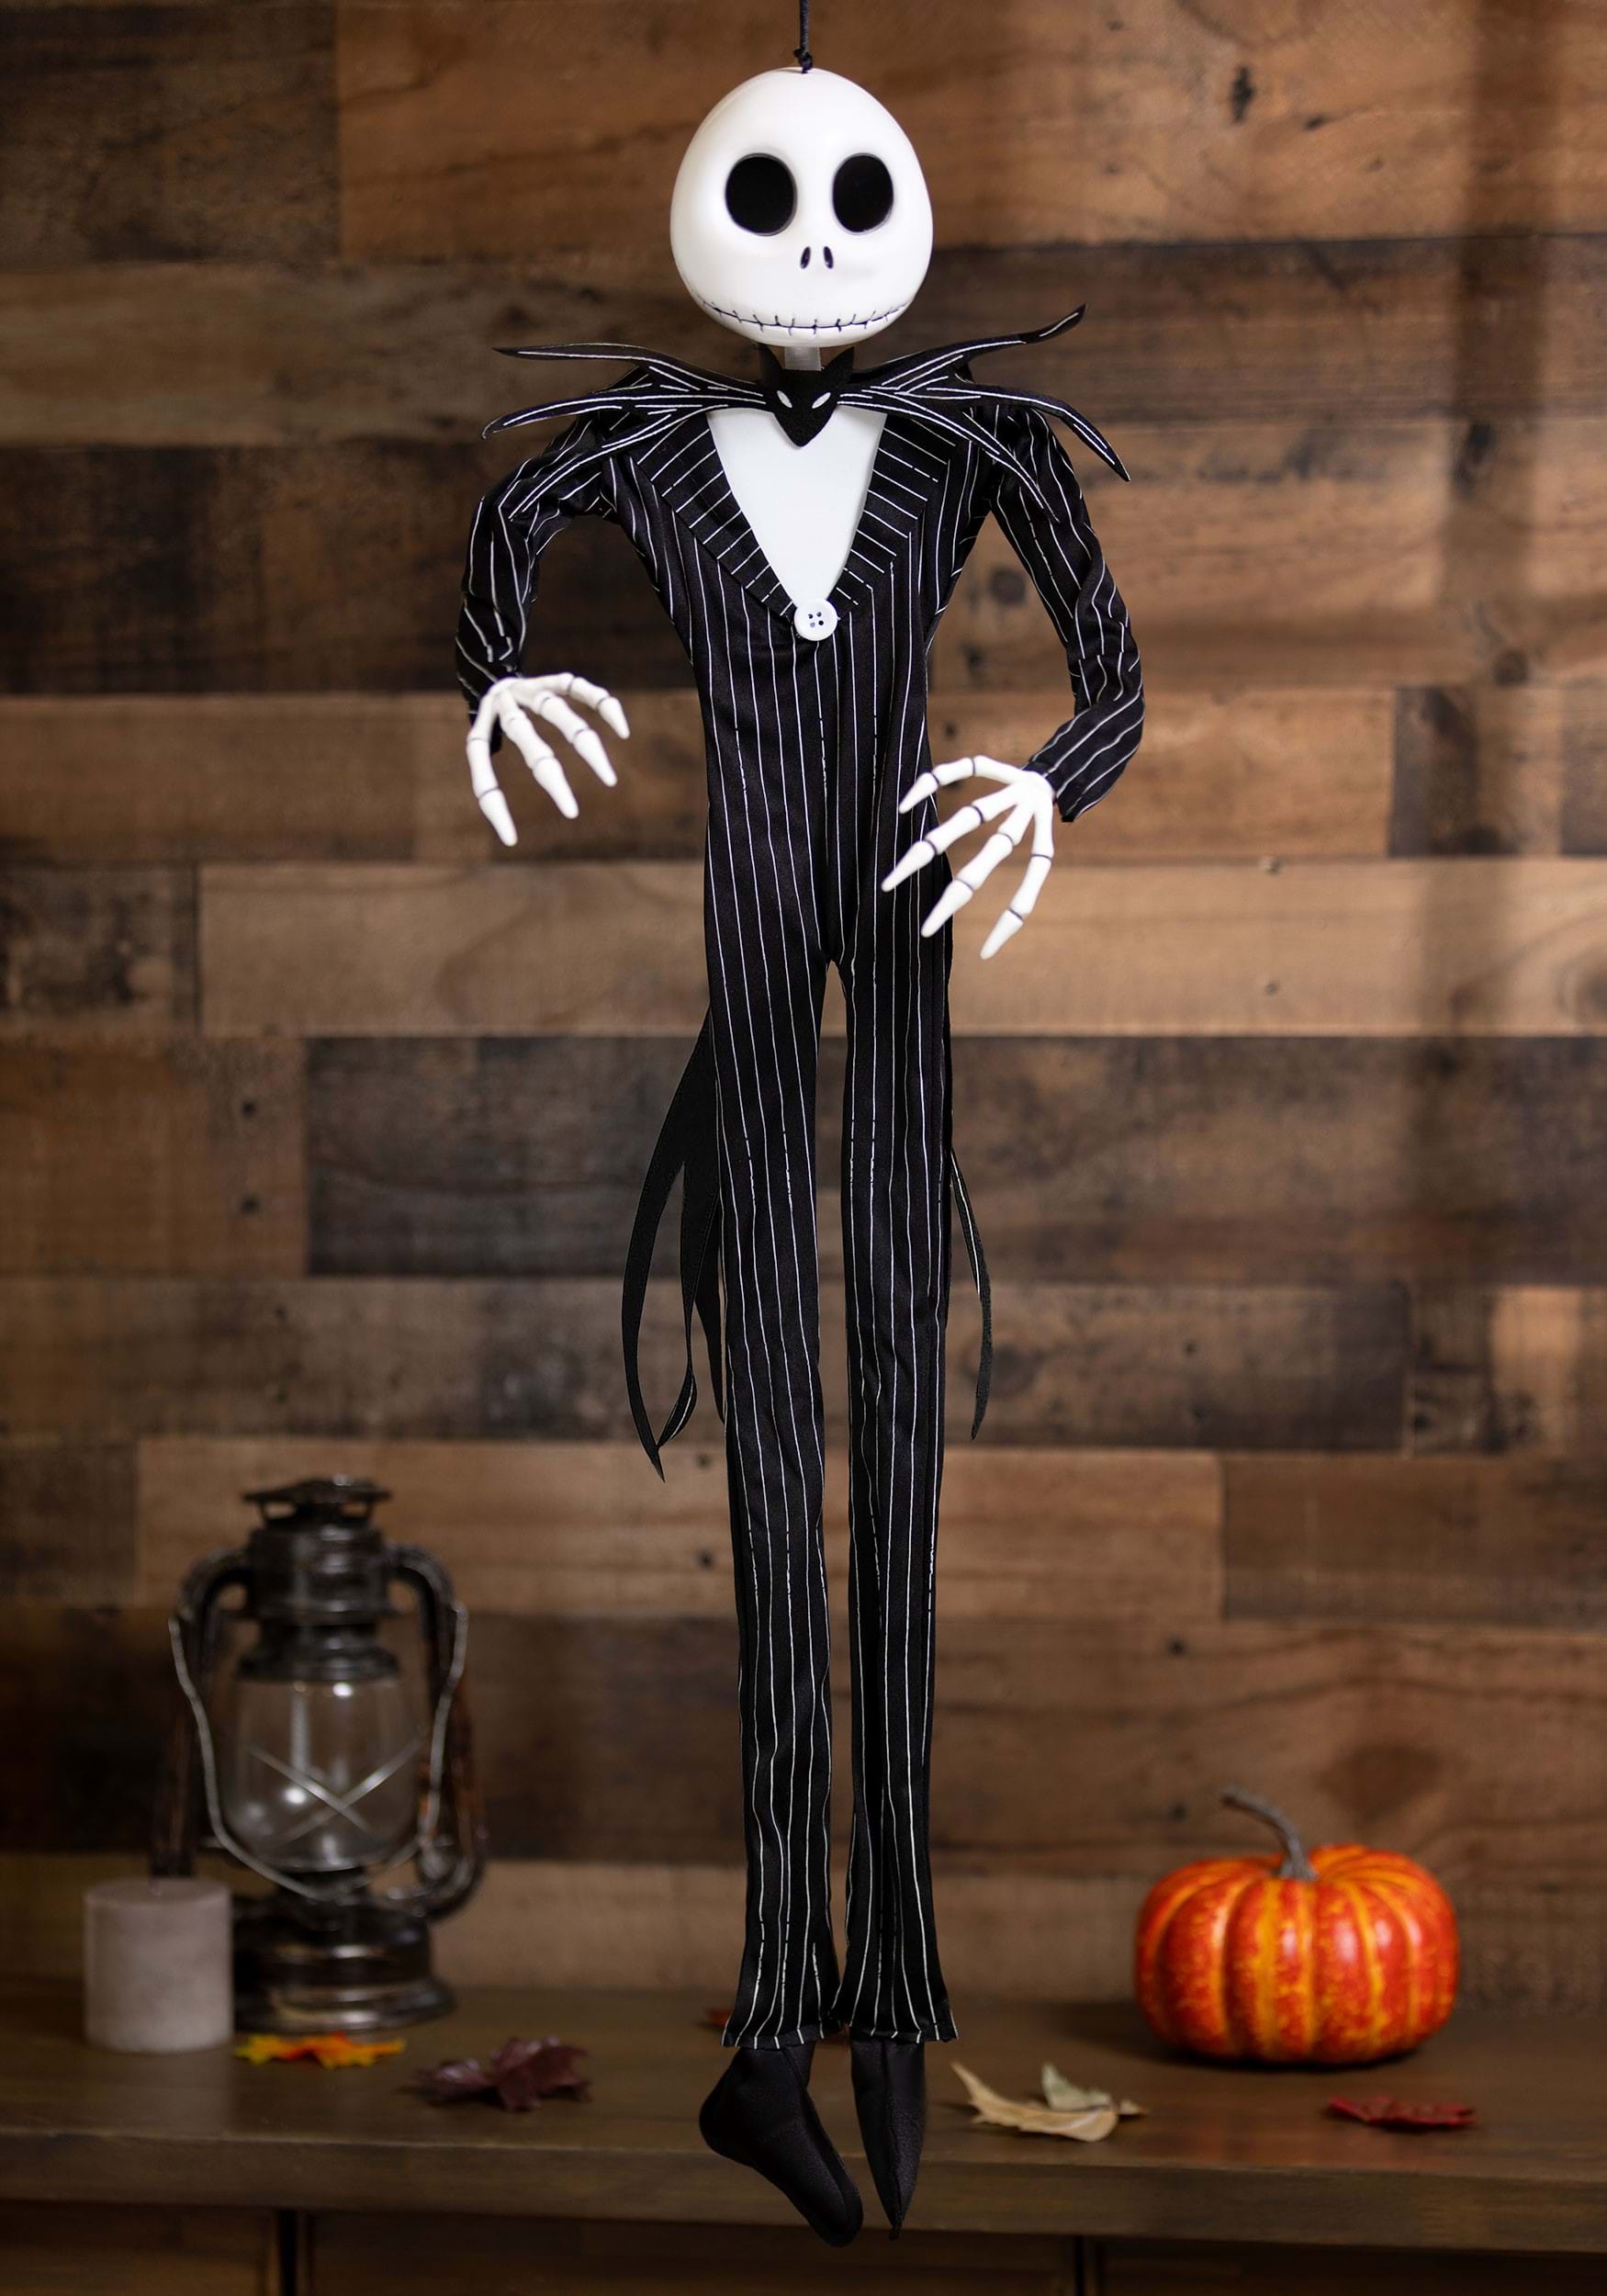 https://images.halloweencostumes.ca/products/93384/1-1/nightmare-before-christmas-hanging-jack-decoration.jpg